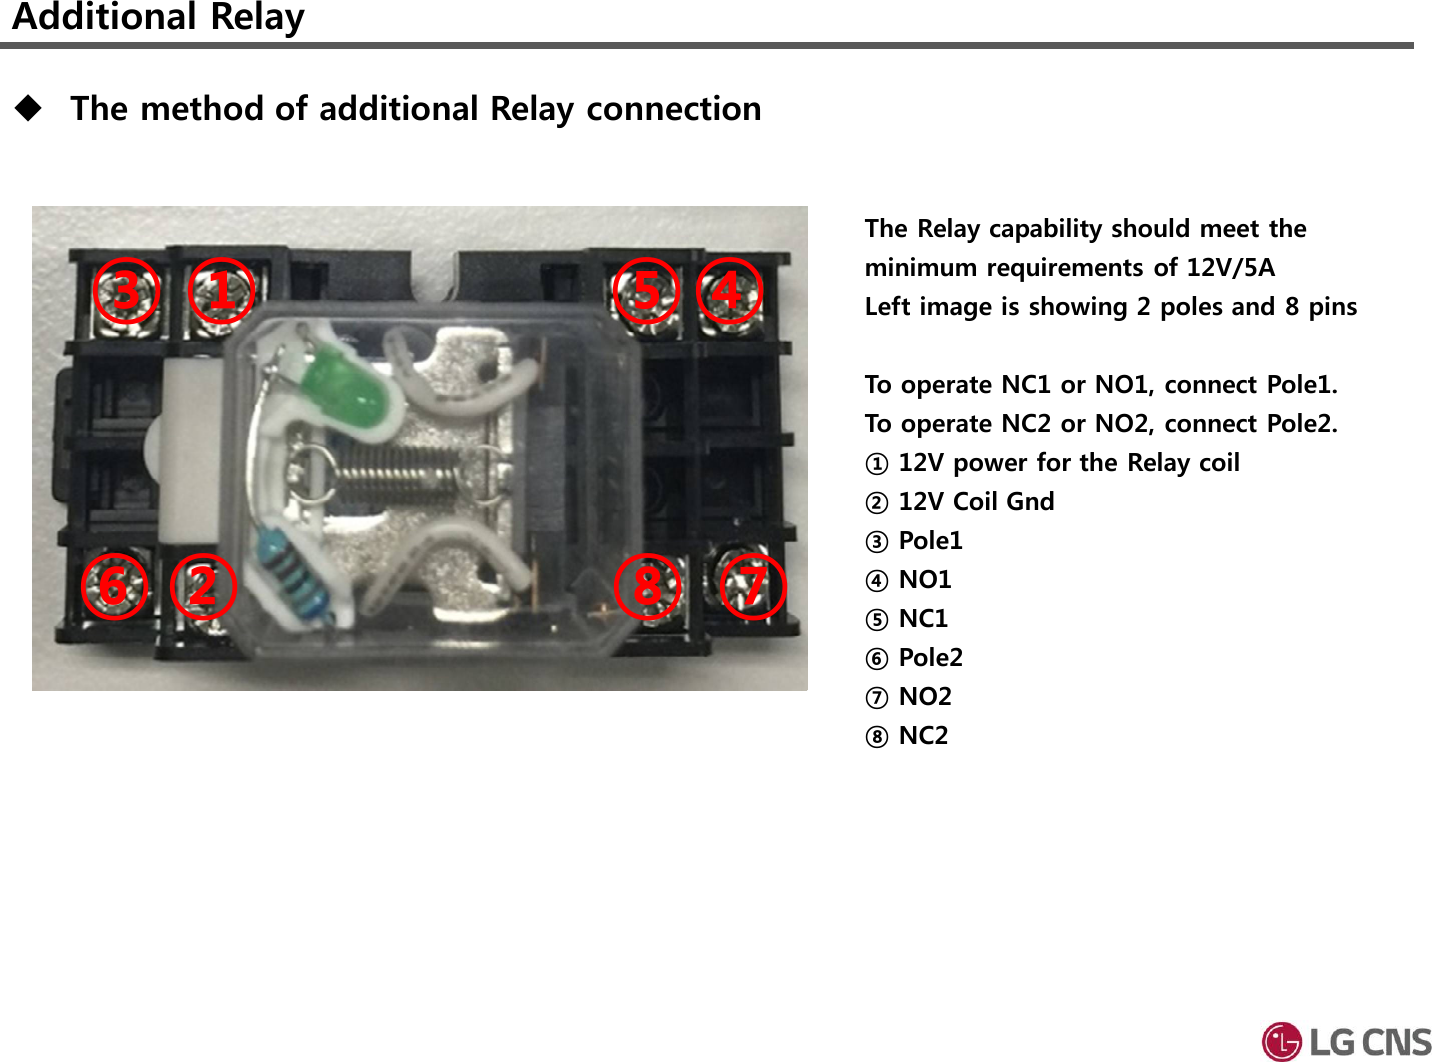 Additional Relay①②③ ④⑤⑥ ⑦⑧The Relay capability should meet the minimum requirements of 12V/5ALeft image is showing 2 poles and 8 pinsTo operate NC1 or NO1, connect Pole1.To operate NC2 or NO2, connect Pole2.① 12V power for the Relay coil② 12V Coil Gnd③ Pole1④ NO1⑤ NC1⑥ Pole2⑦ NO2⑧ NC2The method of additional Relay connection